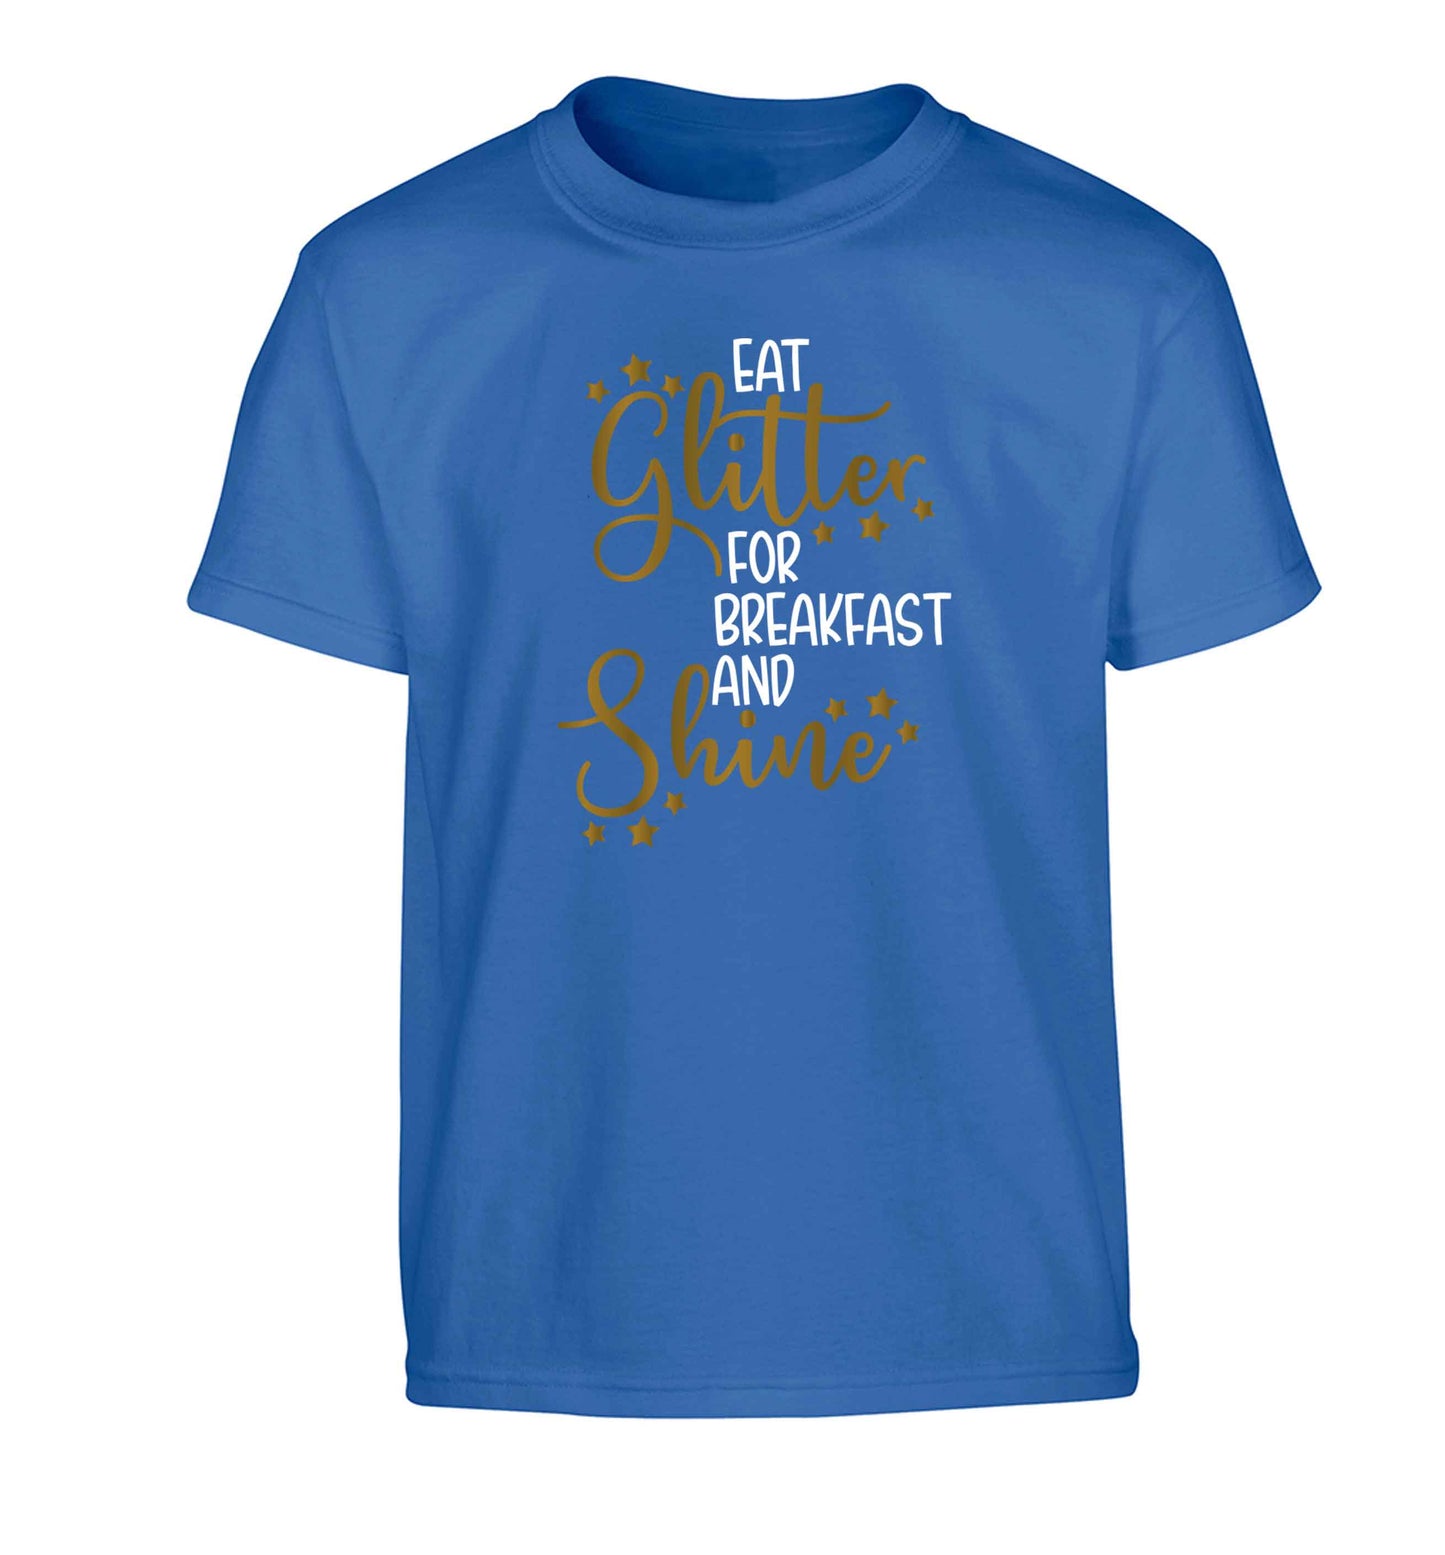 Eat glitter for breakfast and shine all day Children's blue Tshirt 12-13 Years